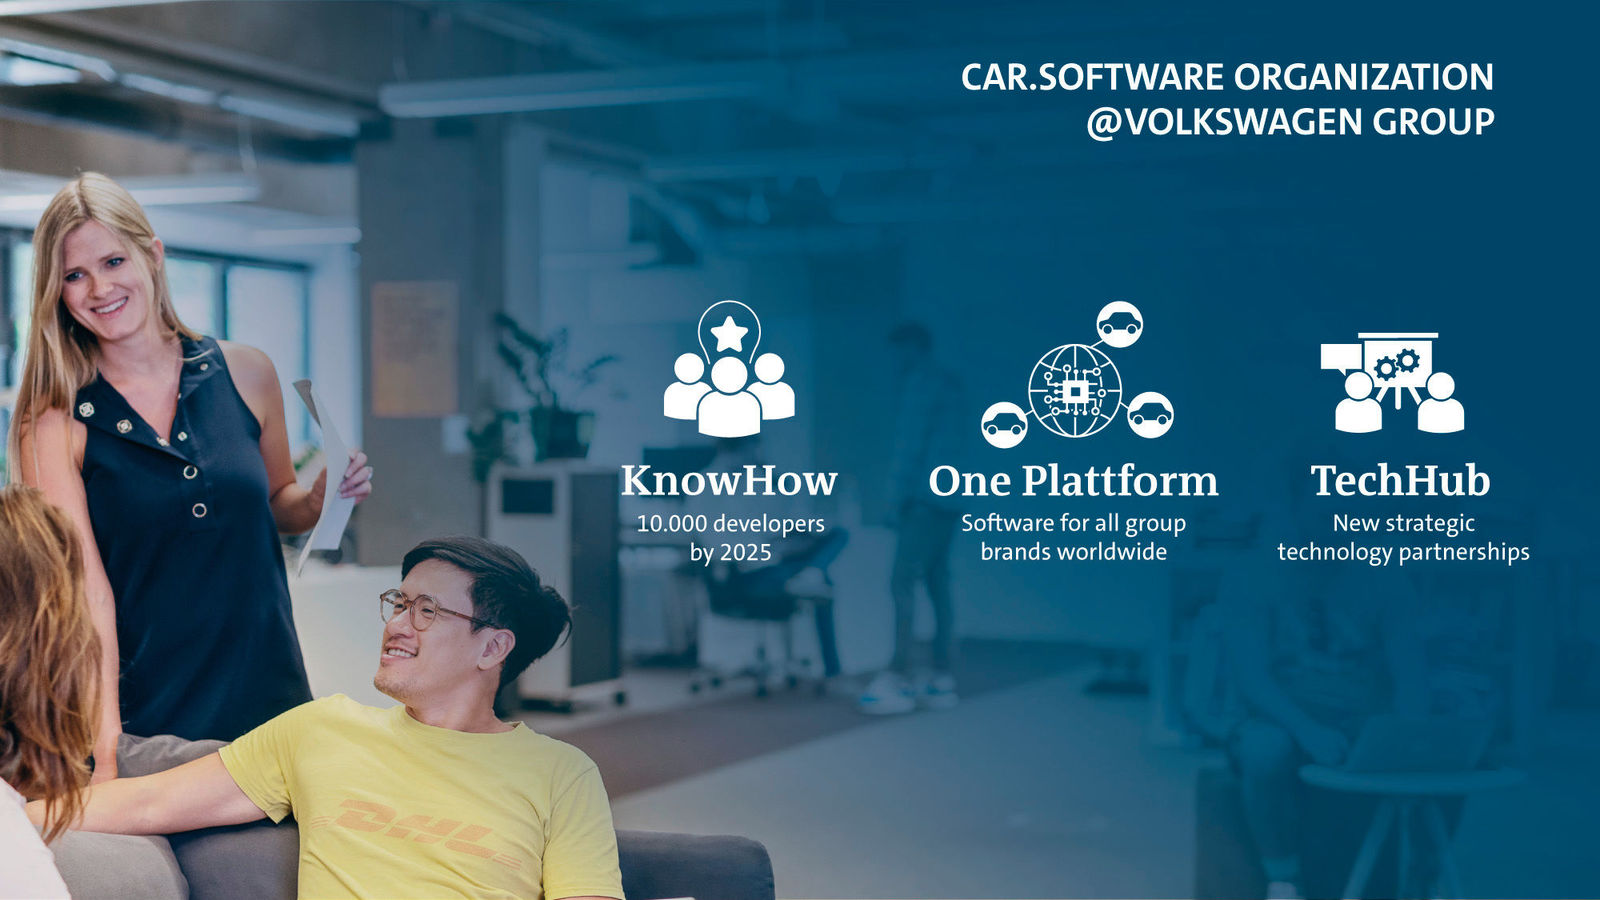 Story: “We want to develop our own software platform”